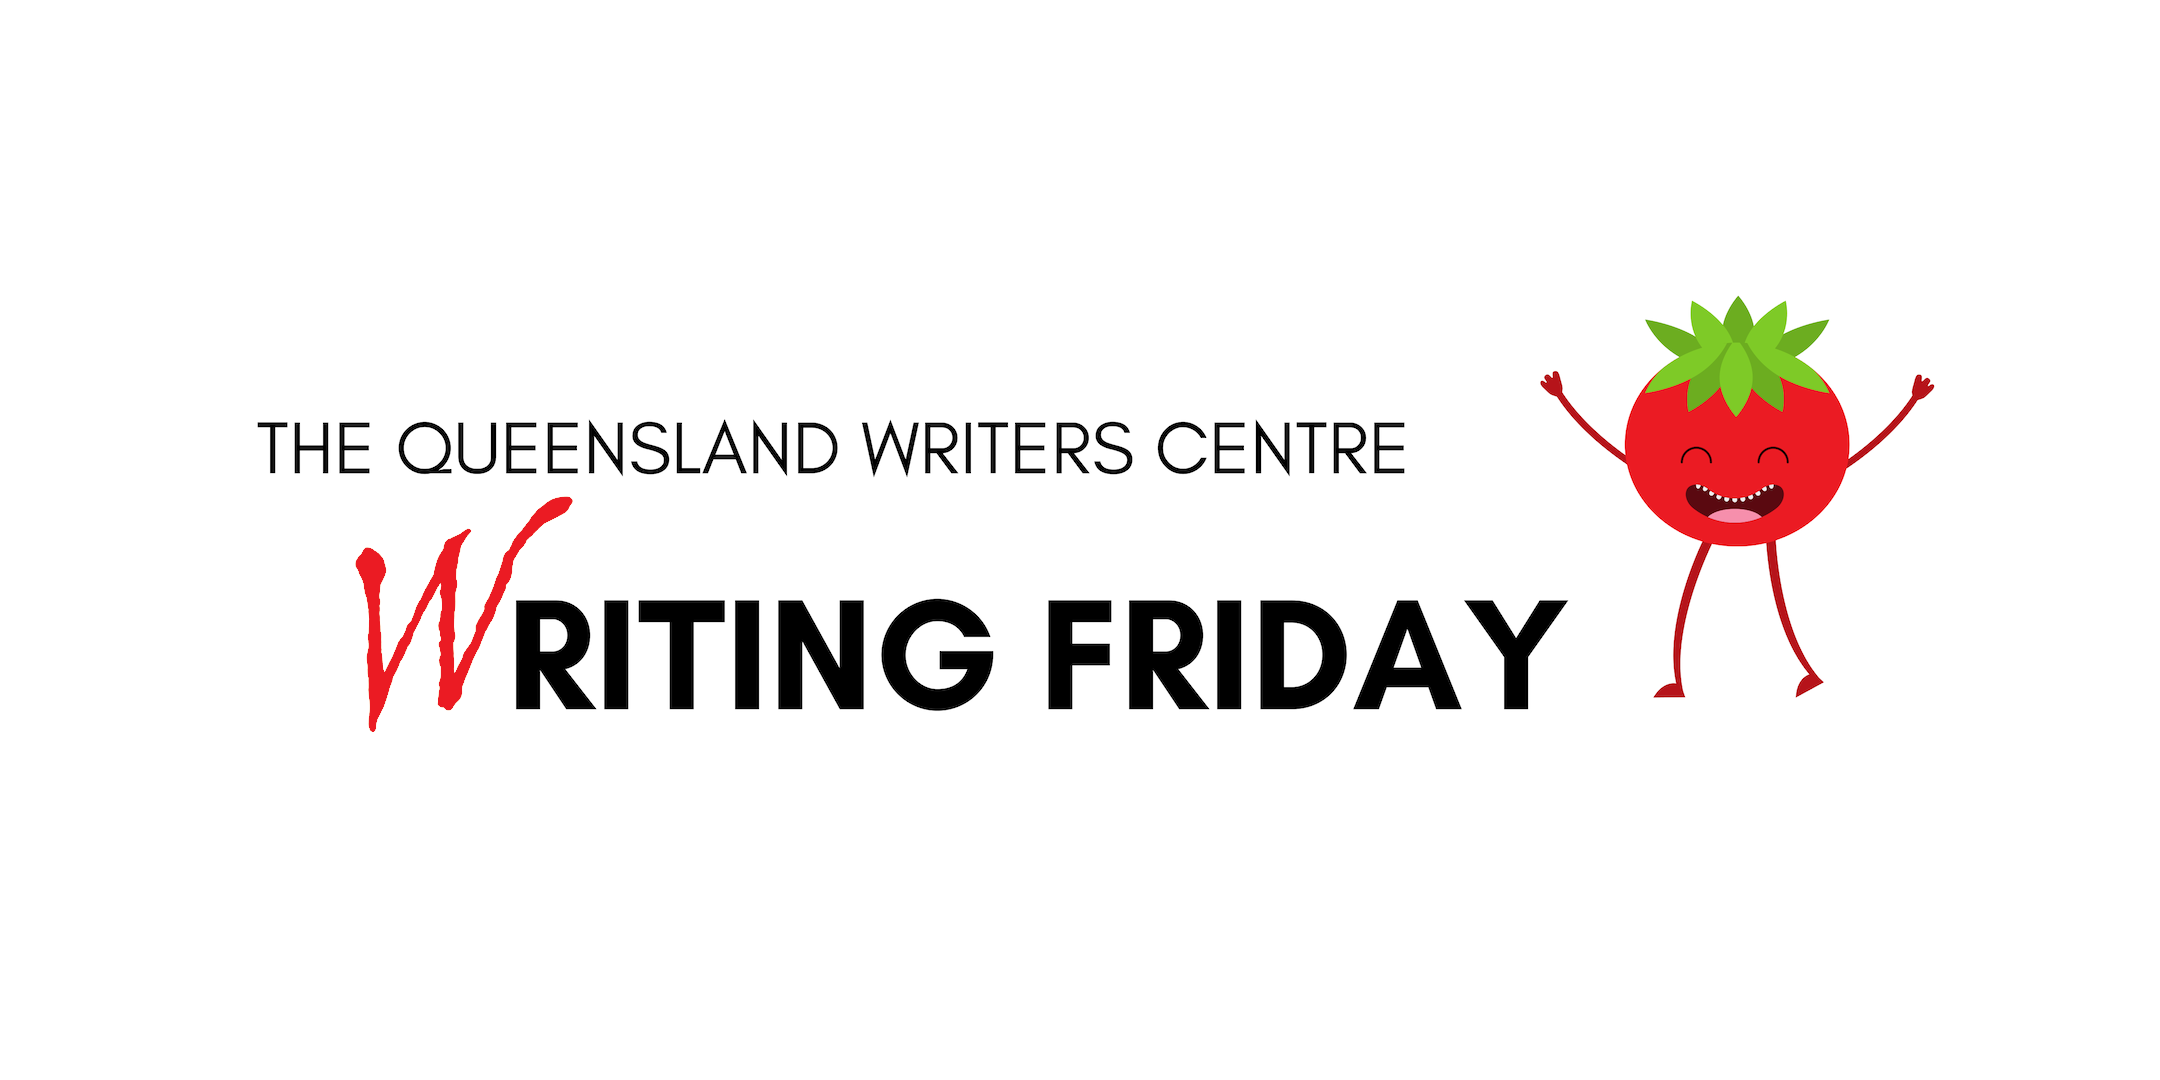 Writing Friday at Queensland Writers Centre - Sessions Now Virtual Until Further Notice